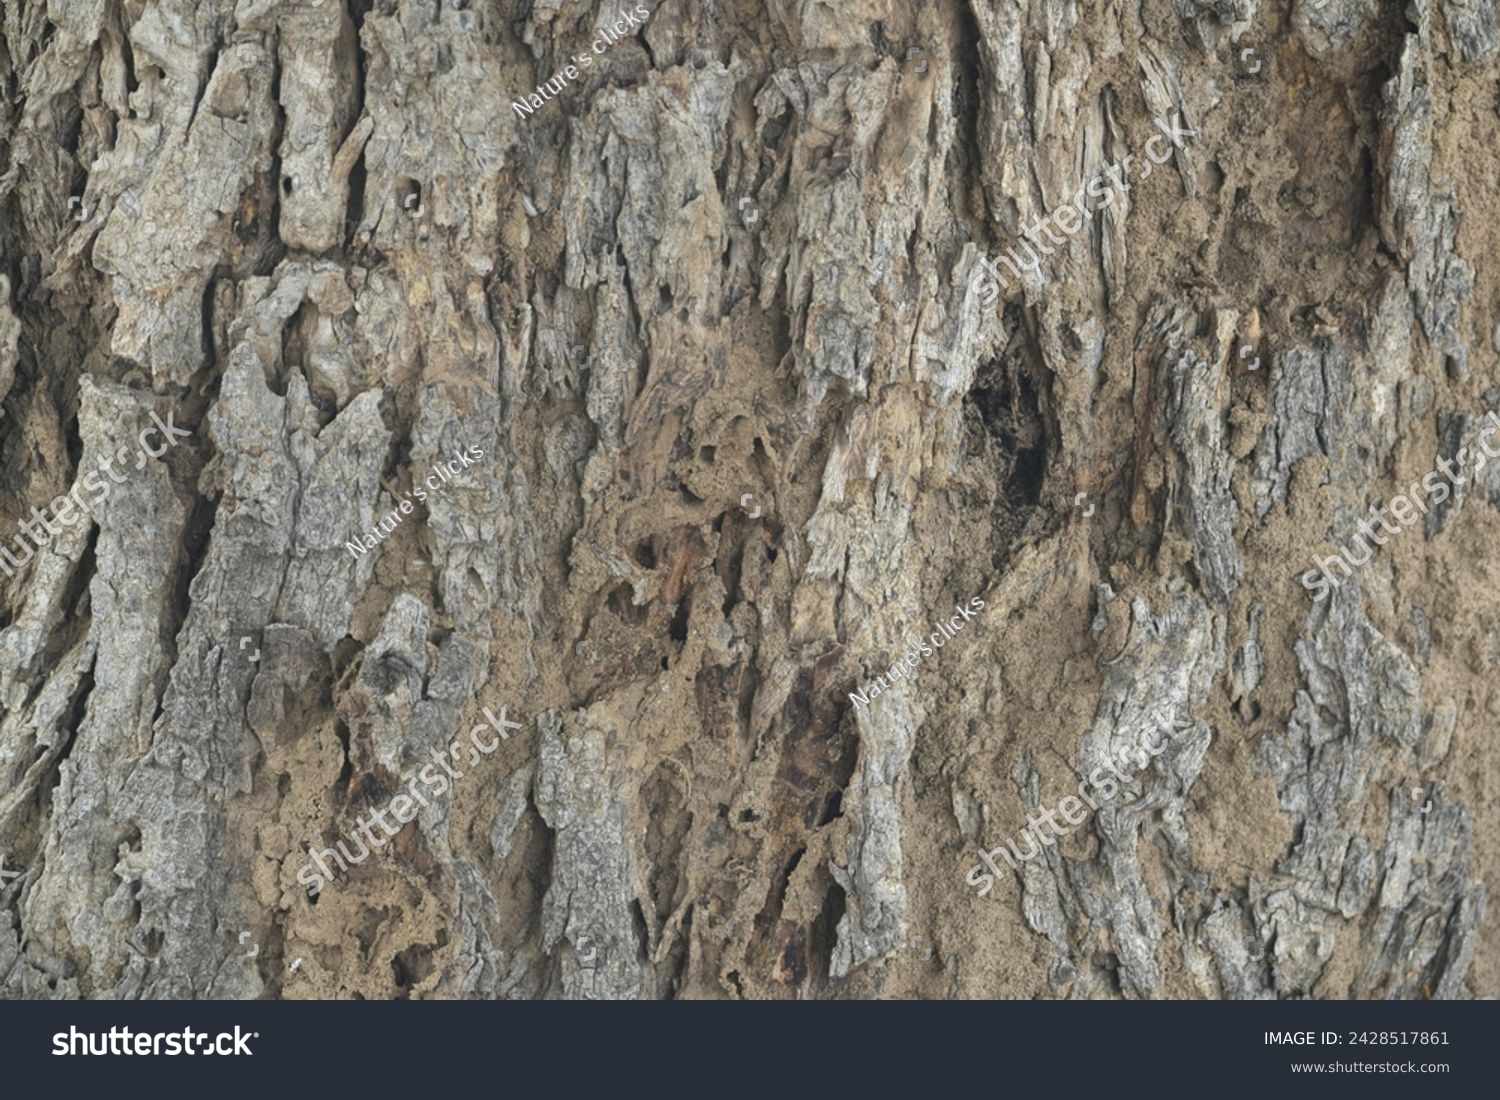 Old tree texture. Bark pattern, For background wood work, Bark of brown hardwood, thick bark hardwood, residential house wood. nature, tree, bark, hardwood, trunk, tree , tree trunk close up texture #2428517861